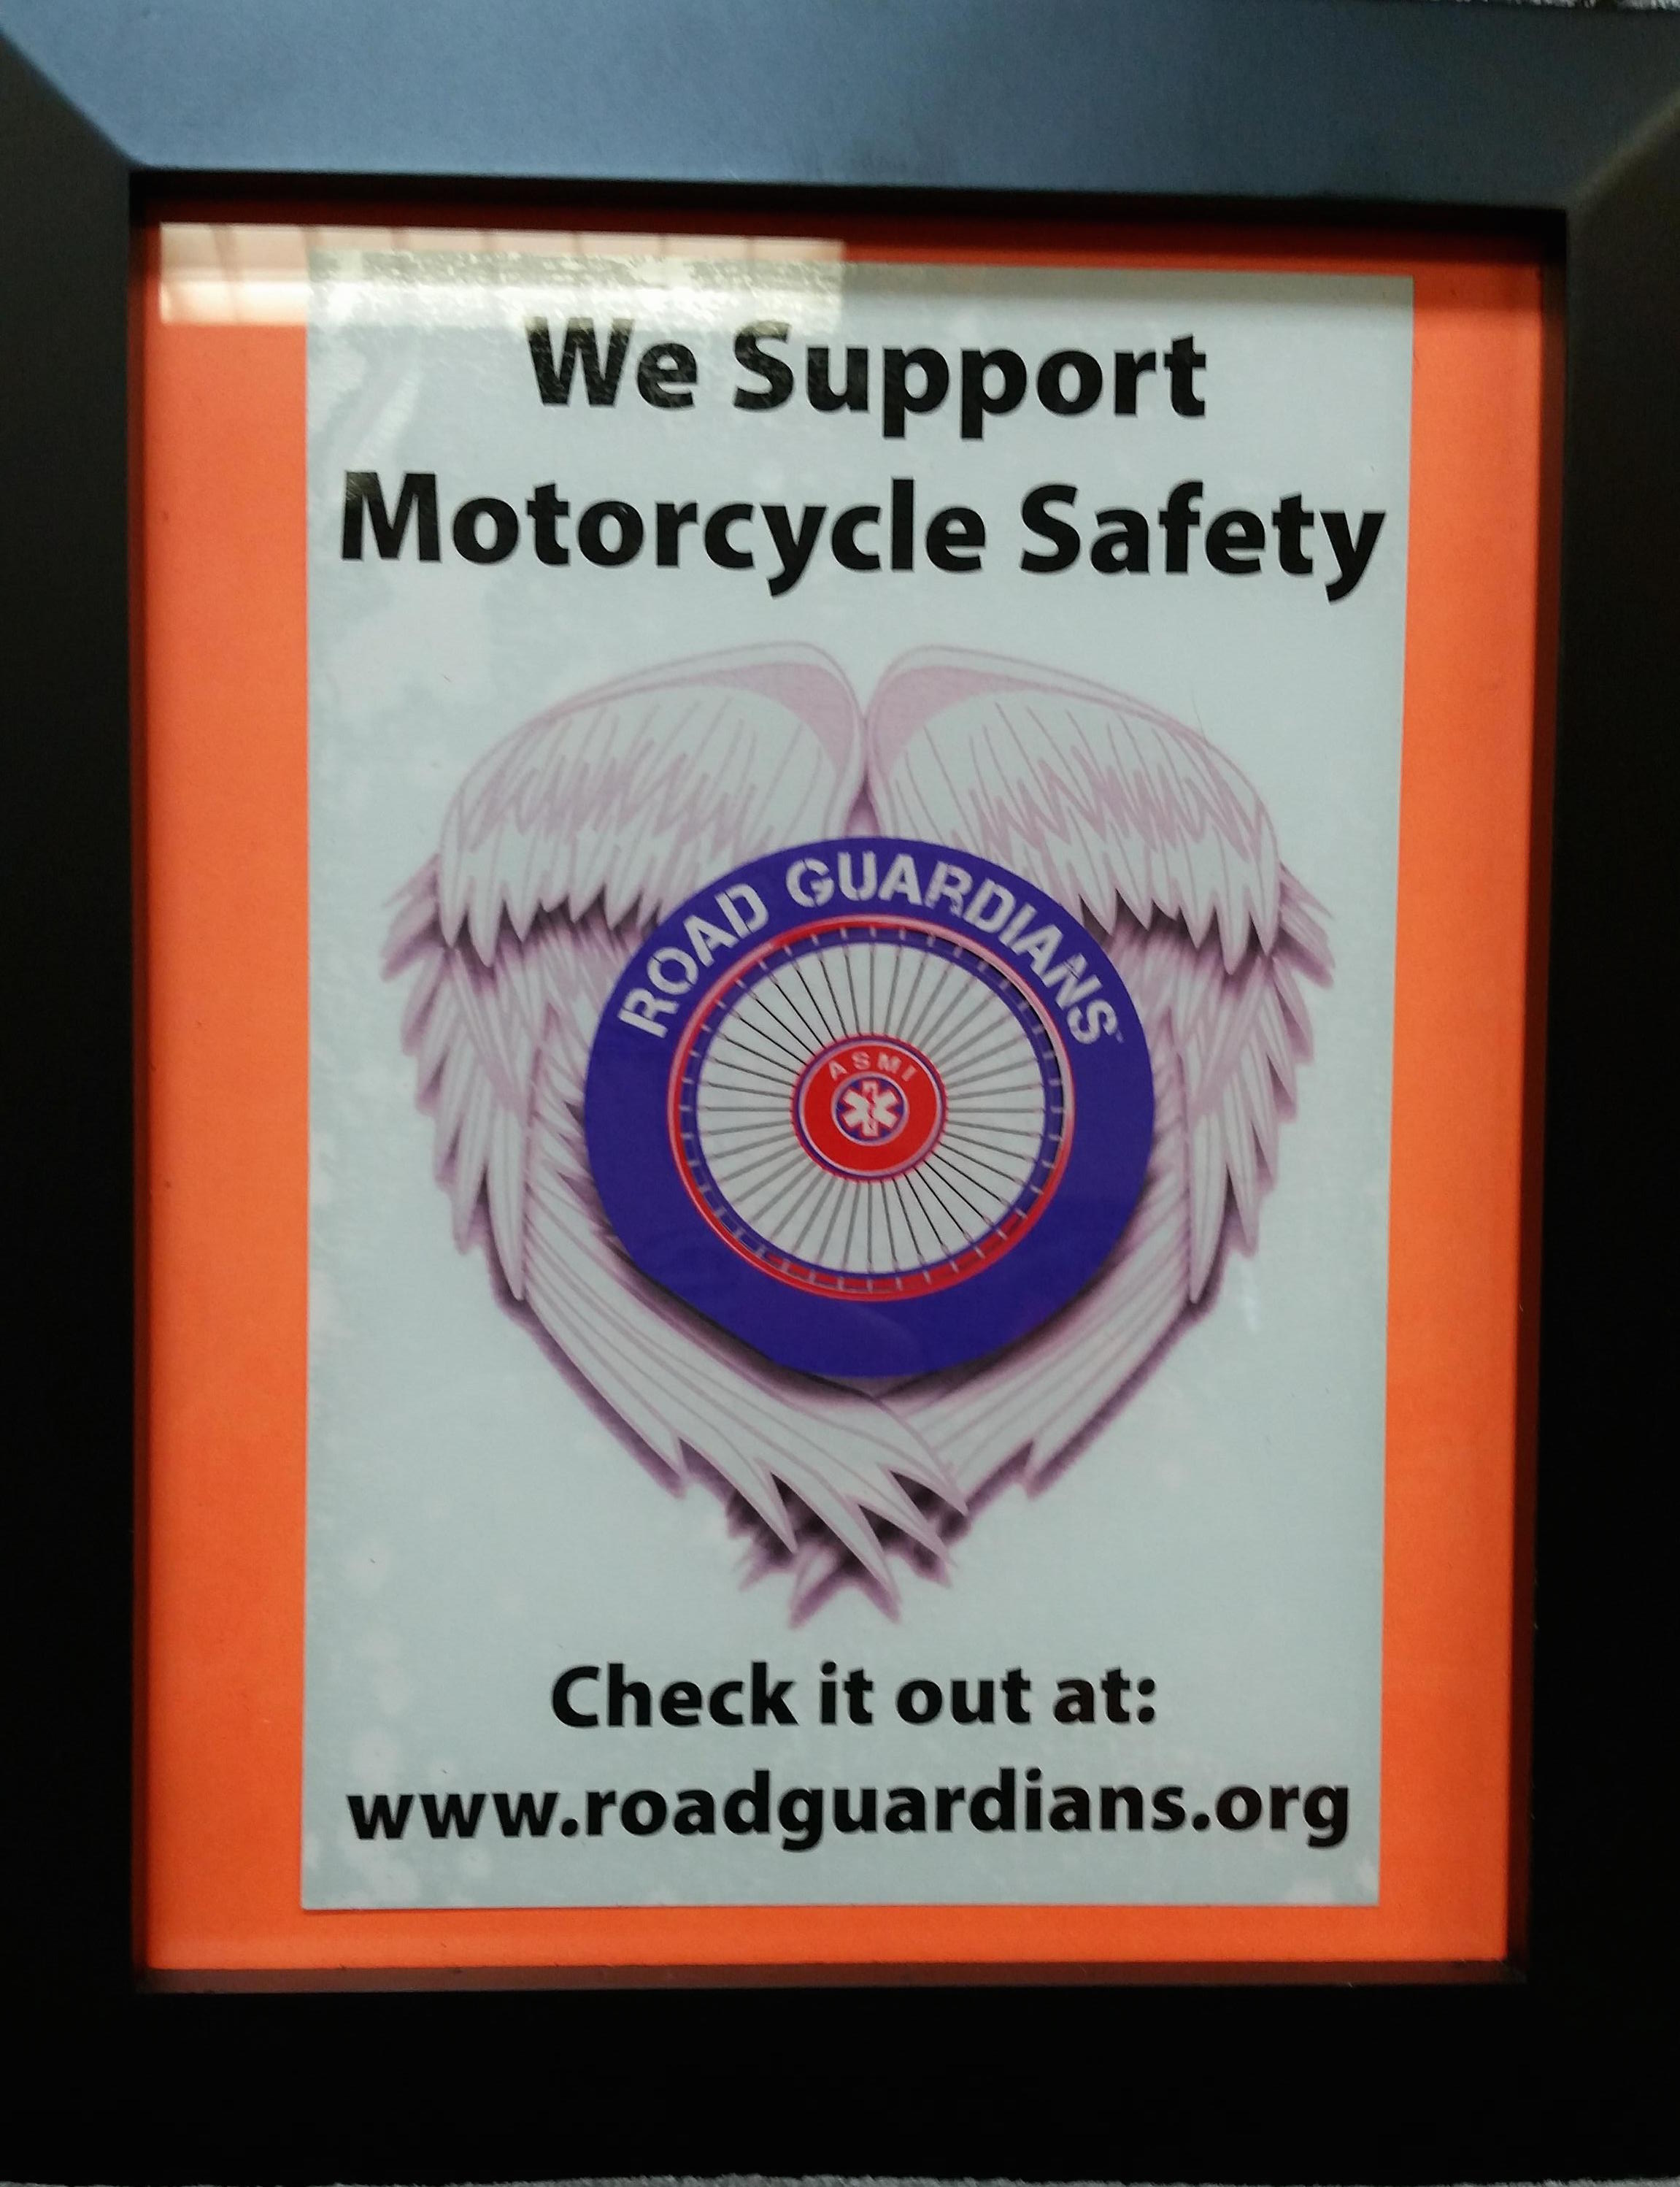 We support MC safety